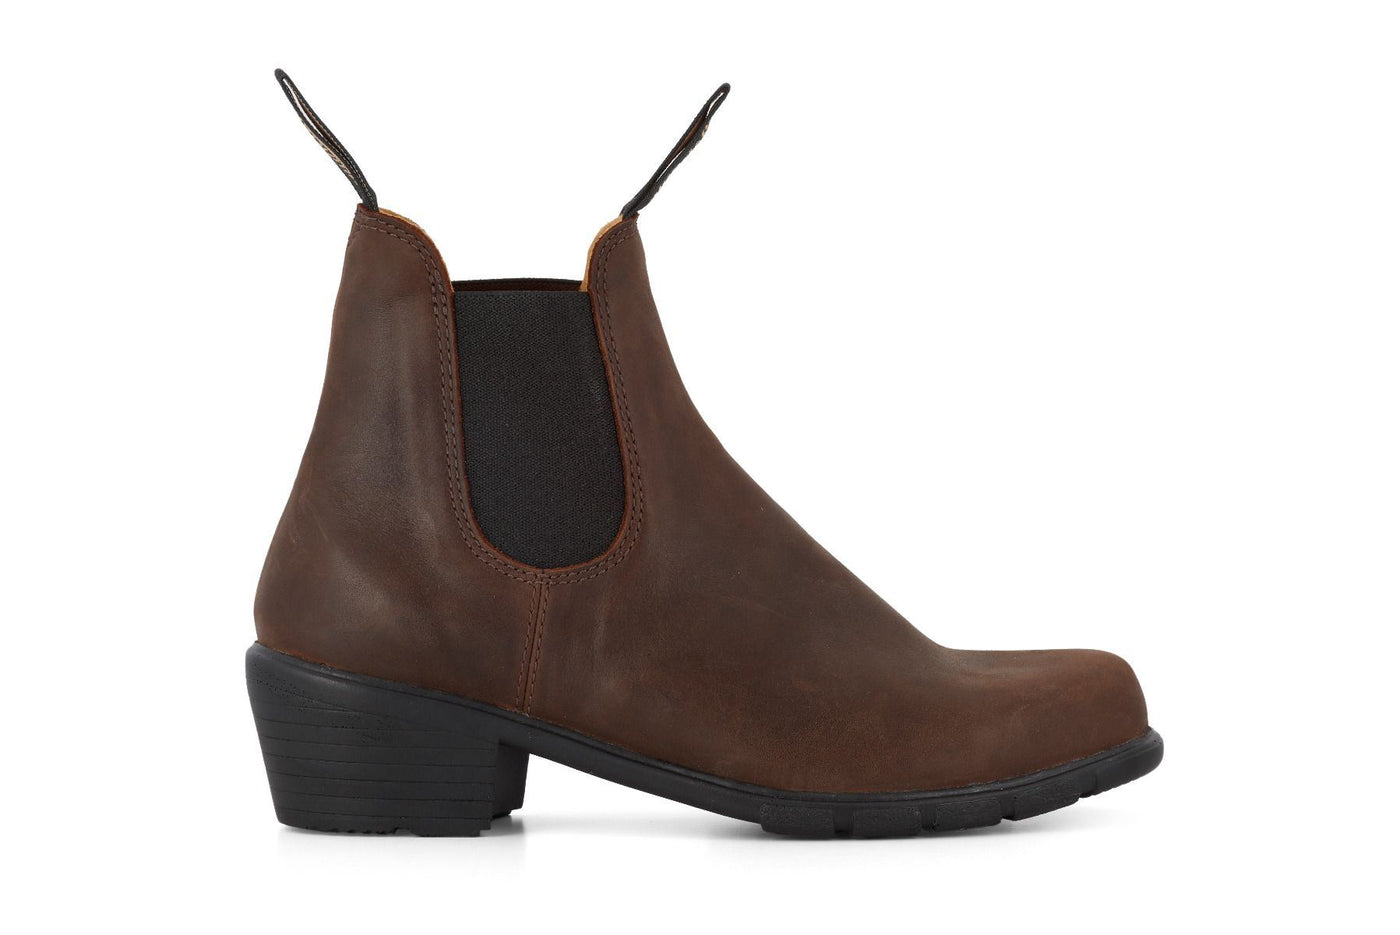 Blundstone #1673 Antique Brown Chelsea Boot